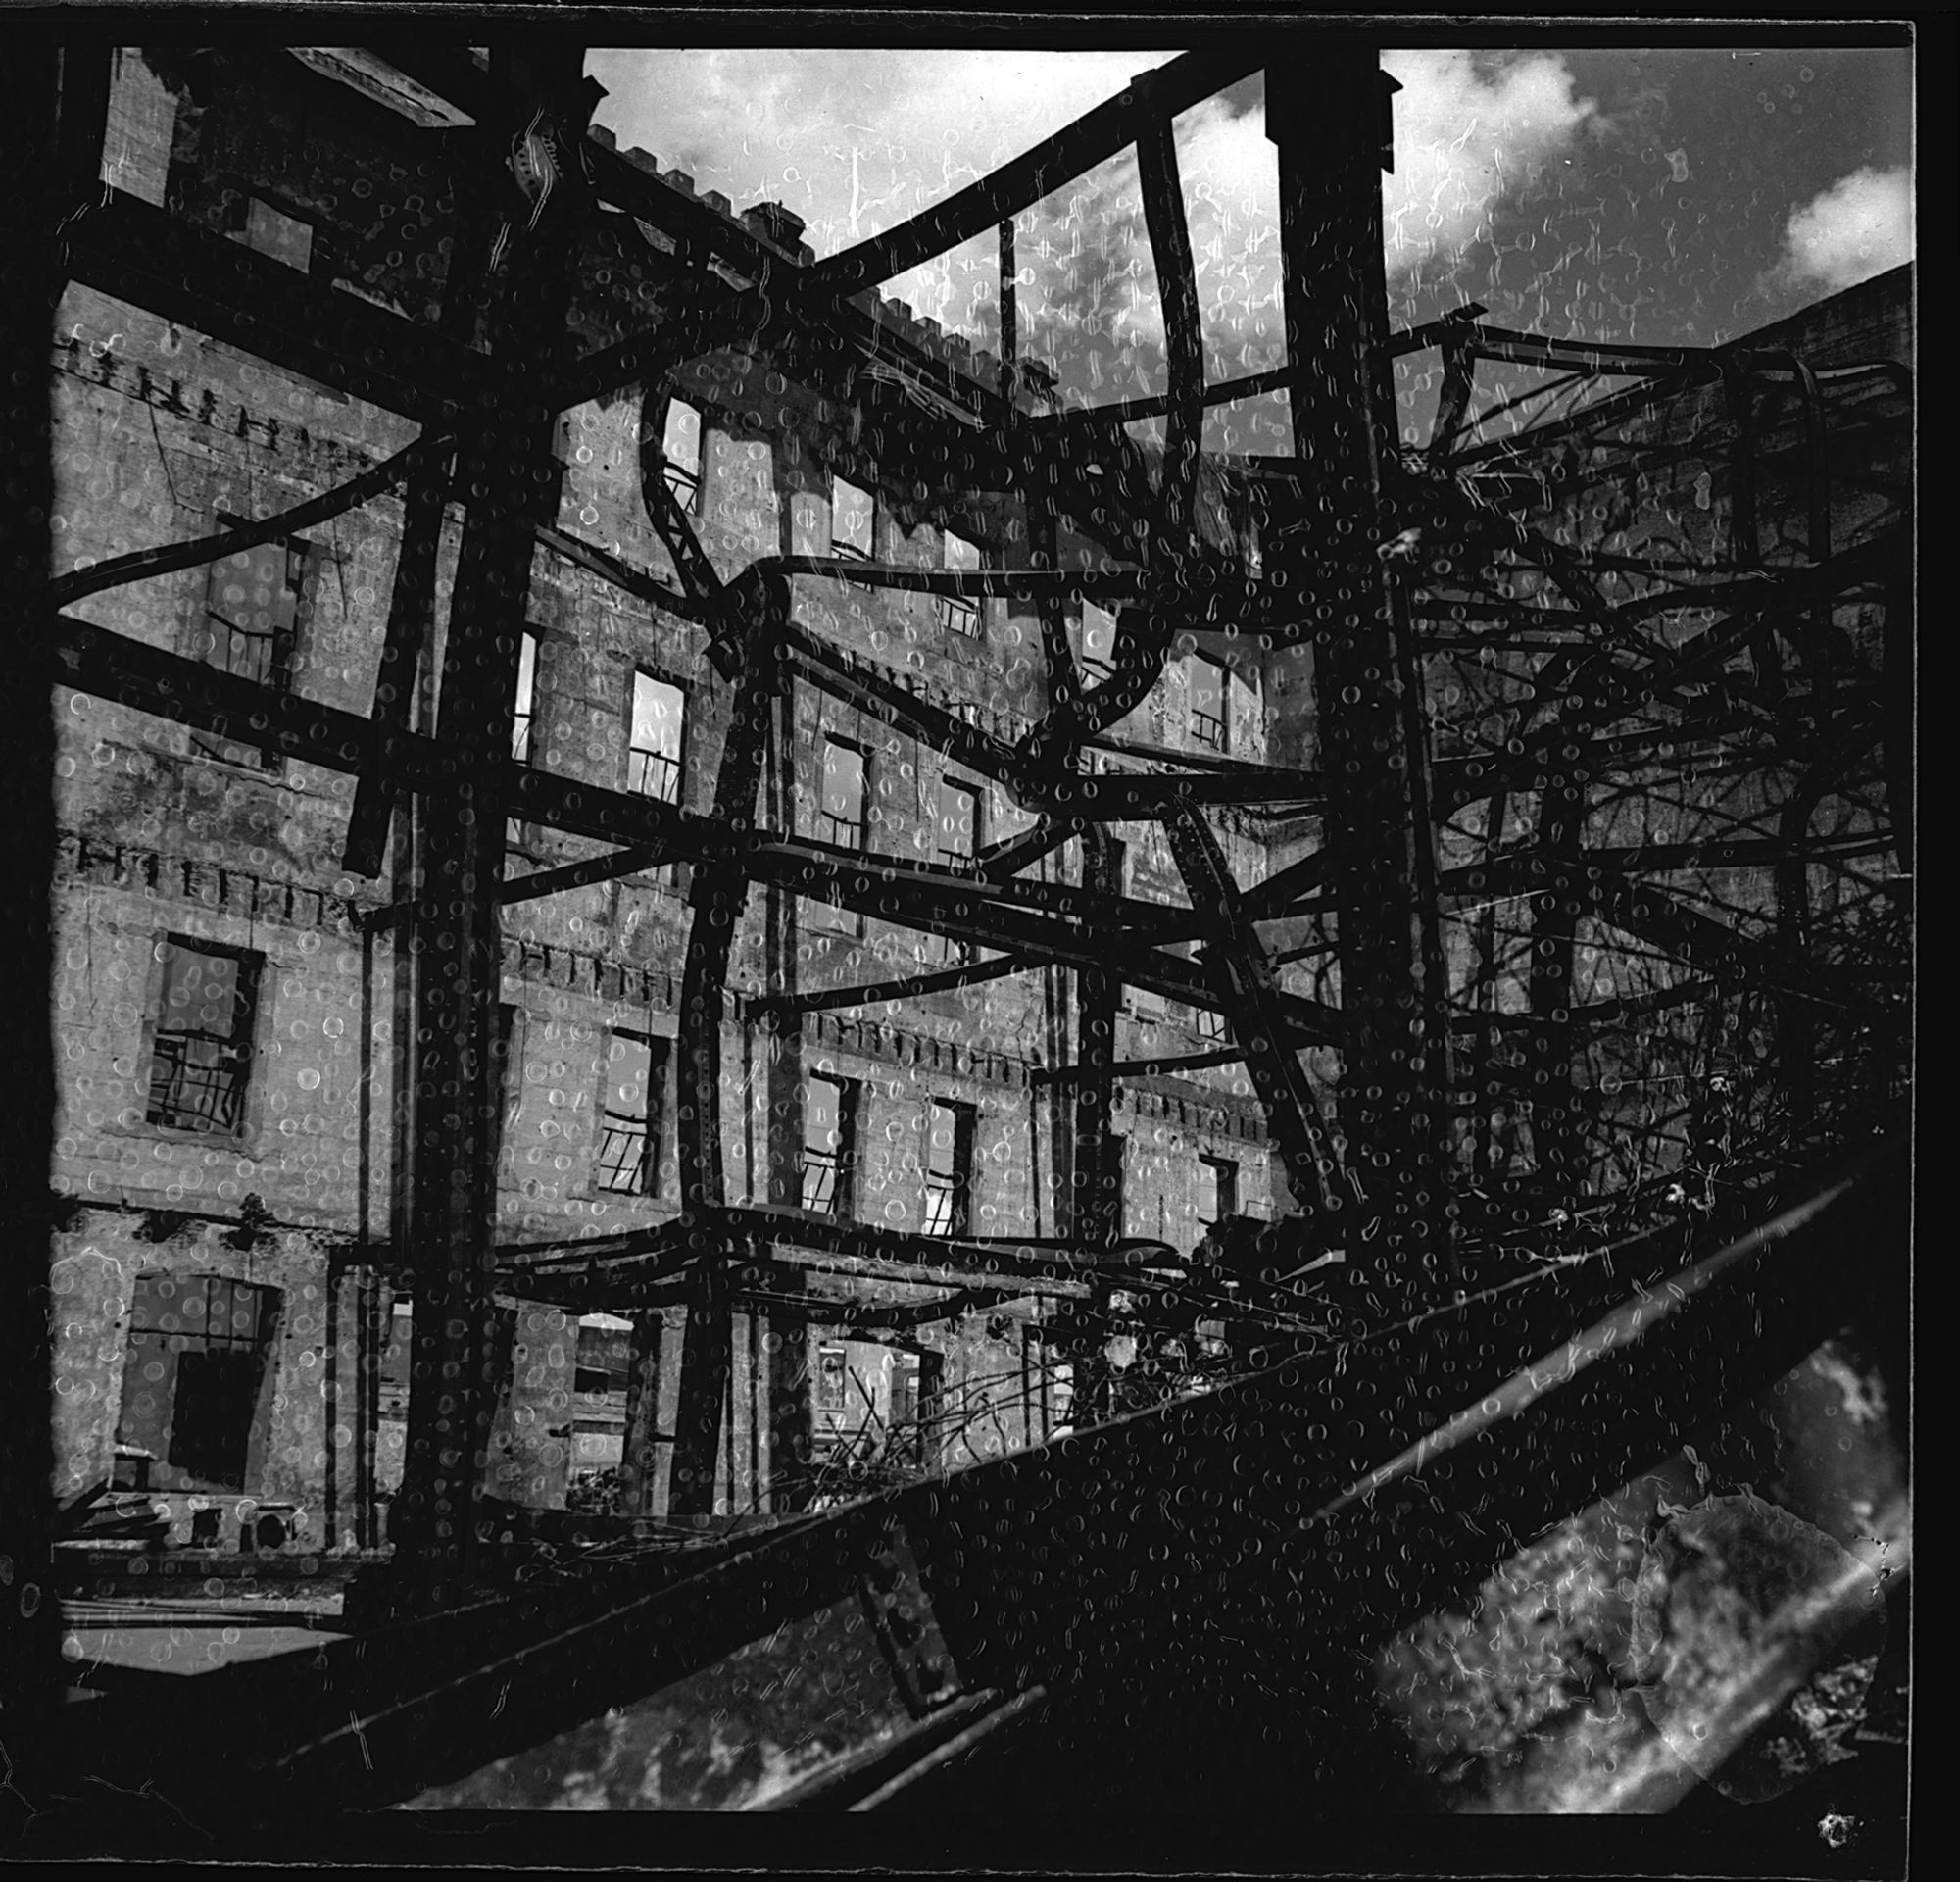 A black-and-white photograph that shows the beams of the American Hardware building in the foreground and another building in the background. There are white circular squiggles on the print.